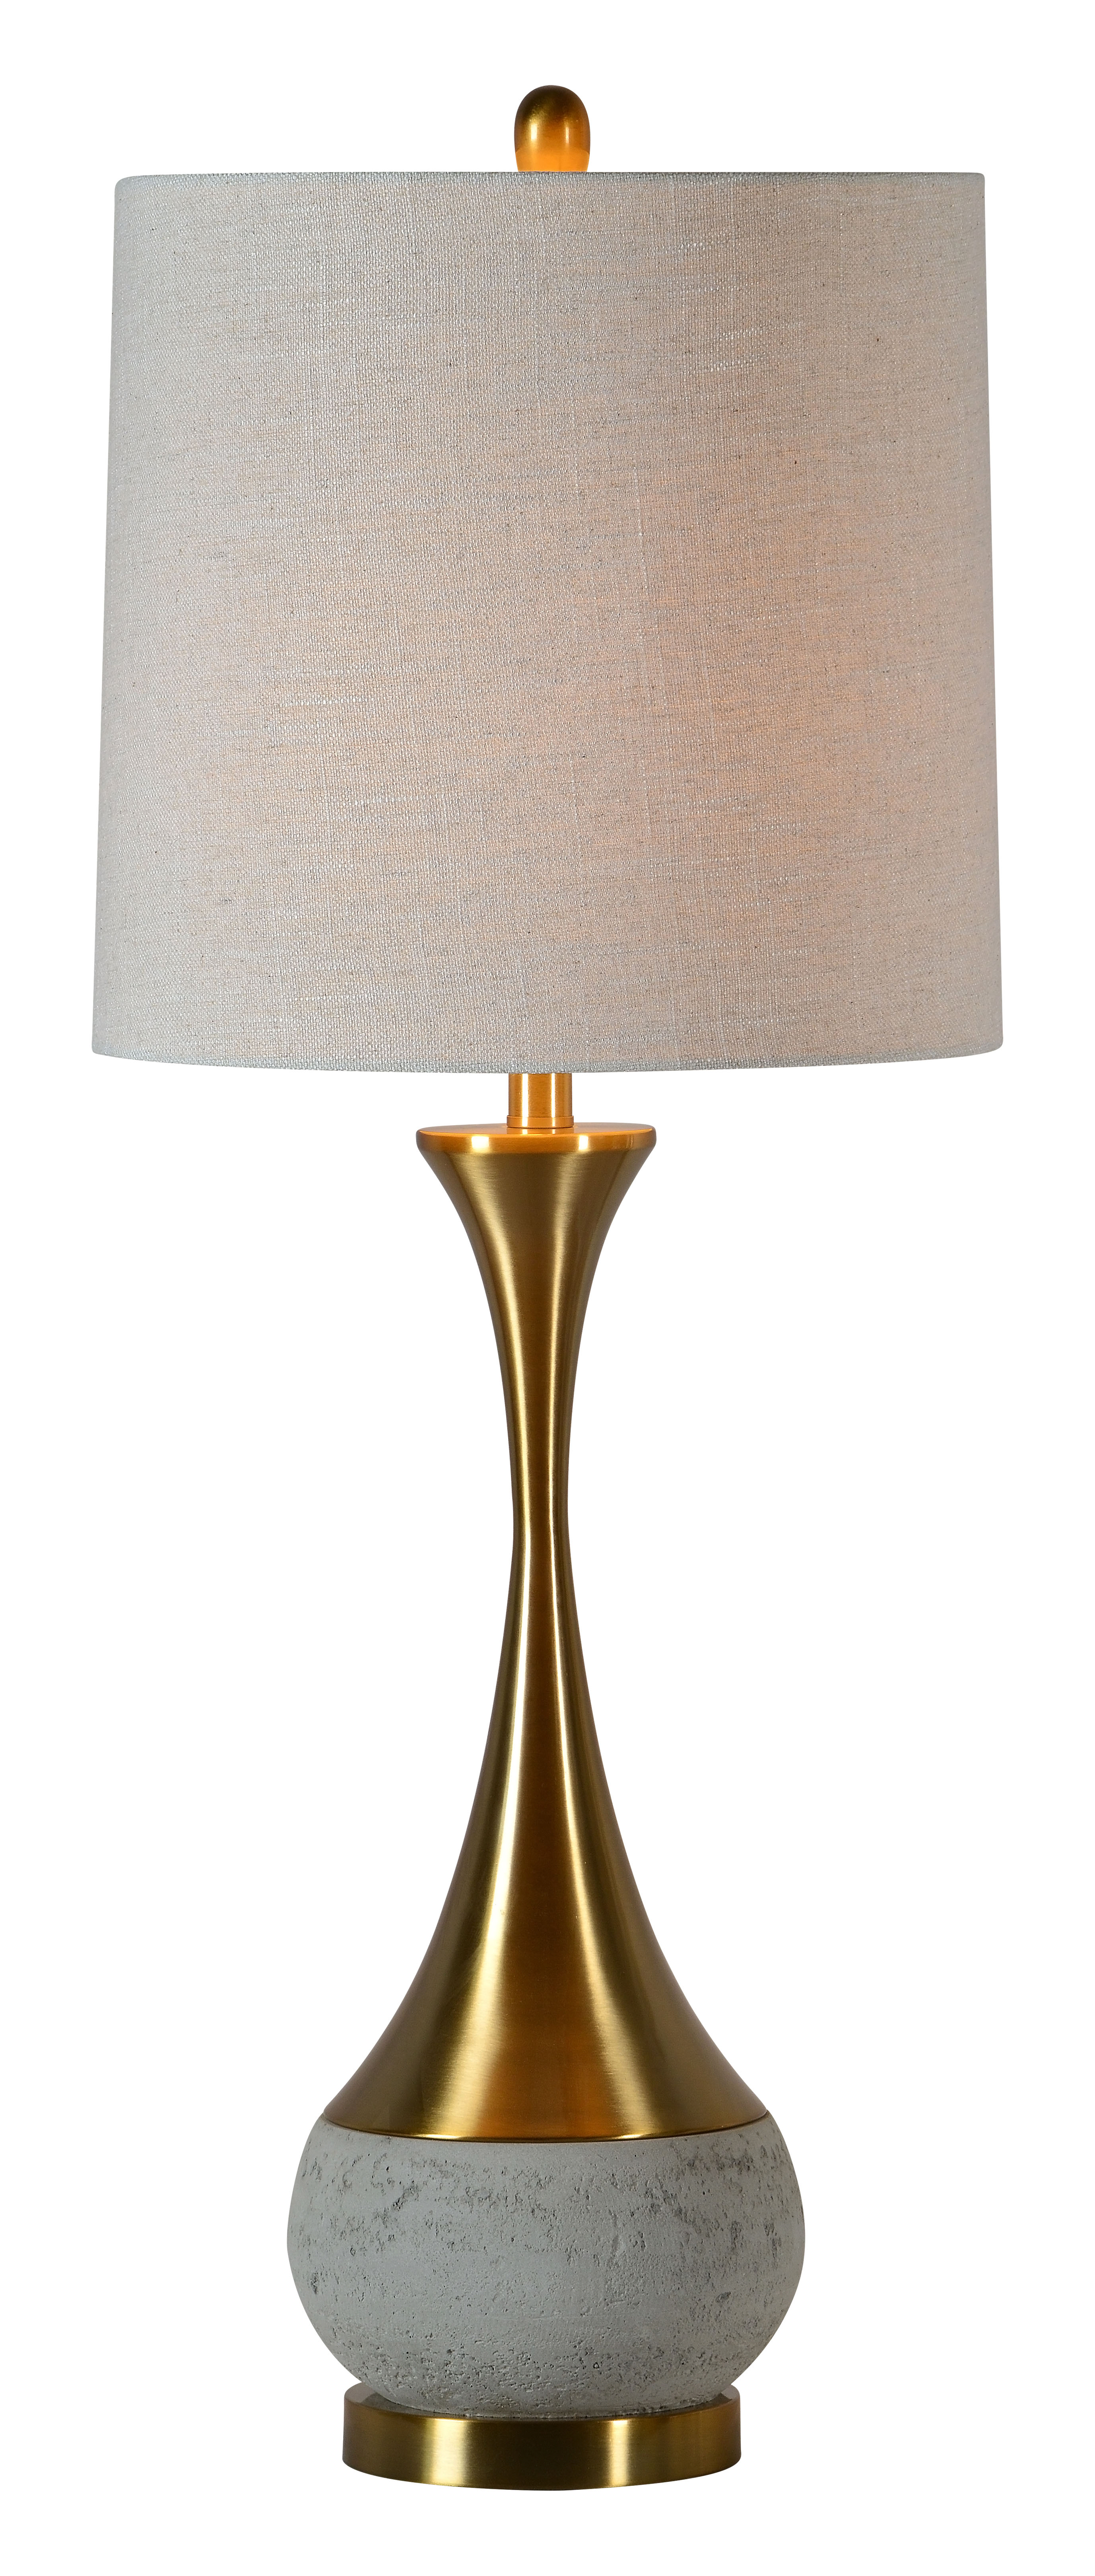 Forty West Claudia table lamp